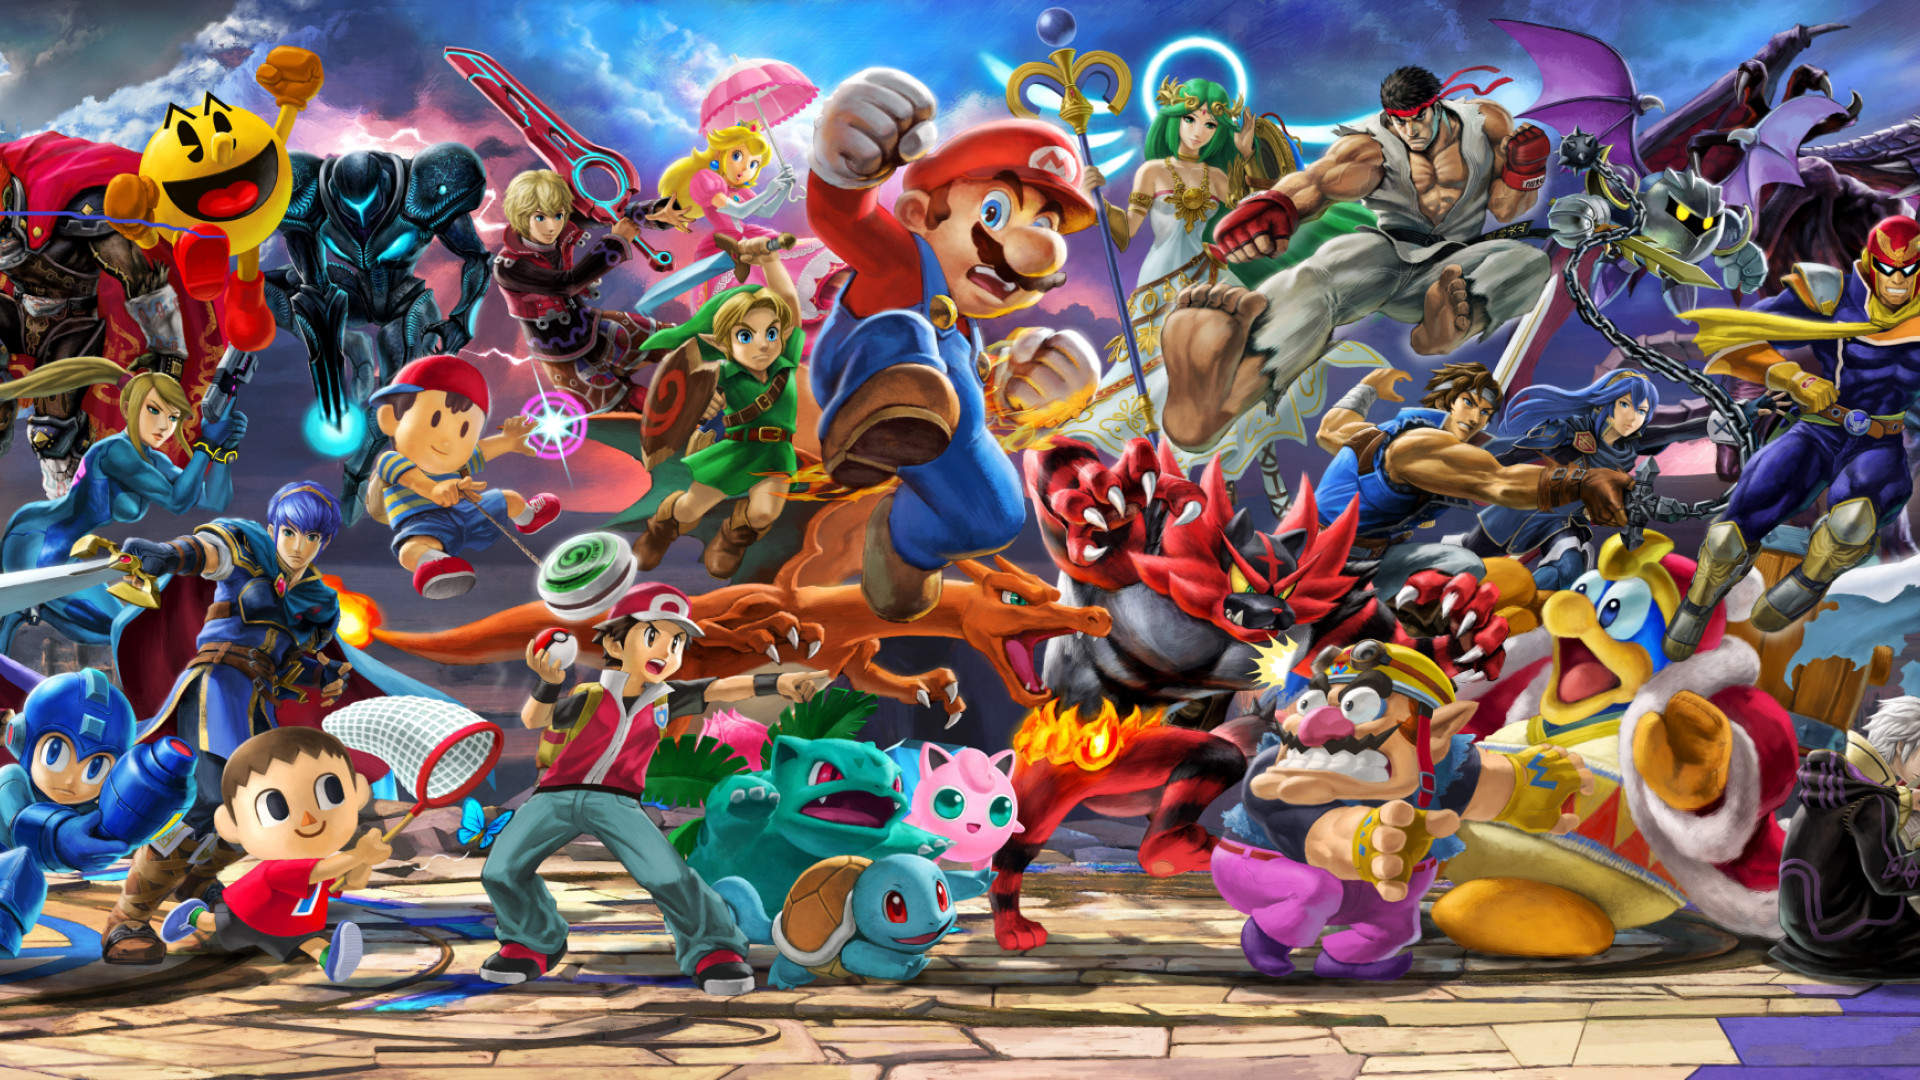 video games to play while stoned - Super Smash Bros. Ultimate video game screenshot